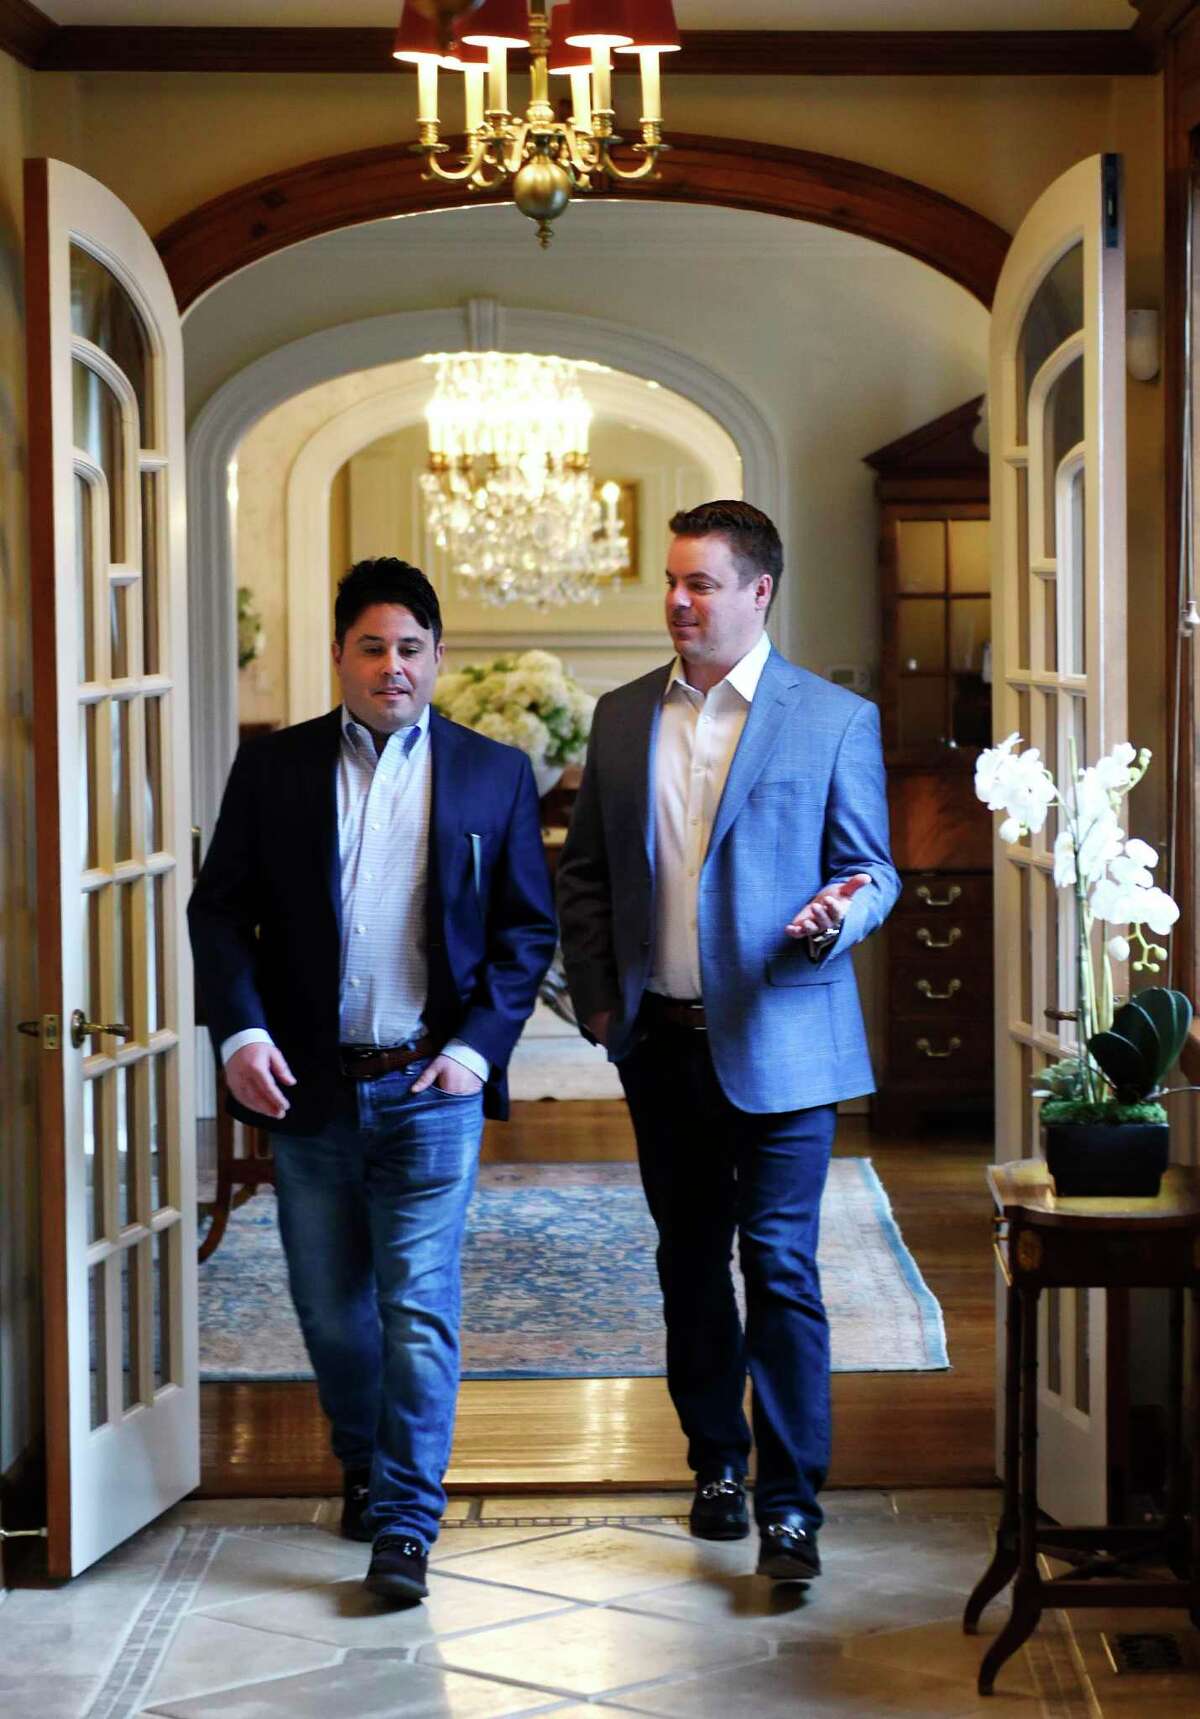 The Agency New Canaan Managing Partners Todd David Miller, left, and Cliff Smith walk through a residential listing in New Canaan, Conn. Thursday, March 18, 2021. Former Higgins Group real estate agents Cliff Smith and Todd David Miller aligned with global luxury real estate firm The Agency. The Agency New Canaan is the group's first Connecticut franchise.